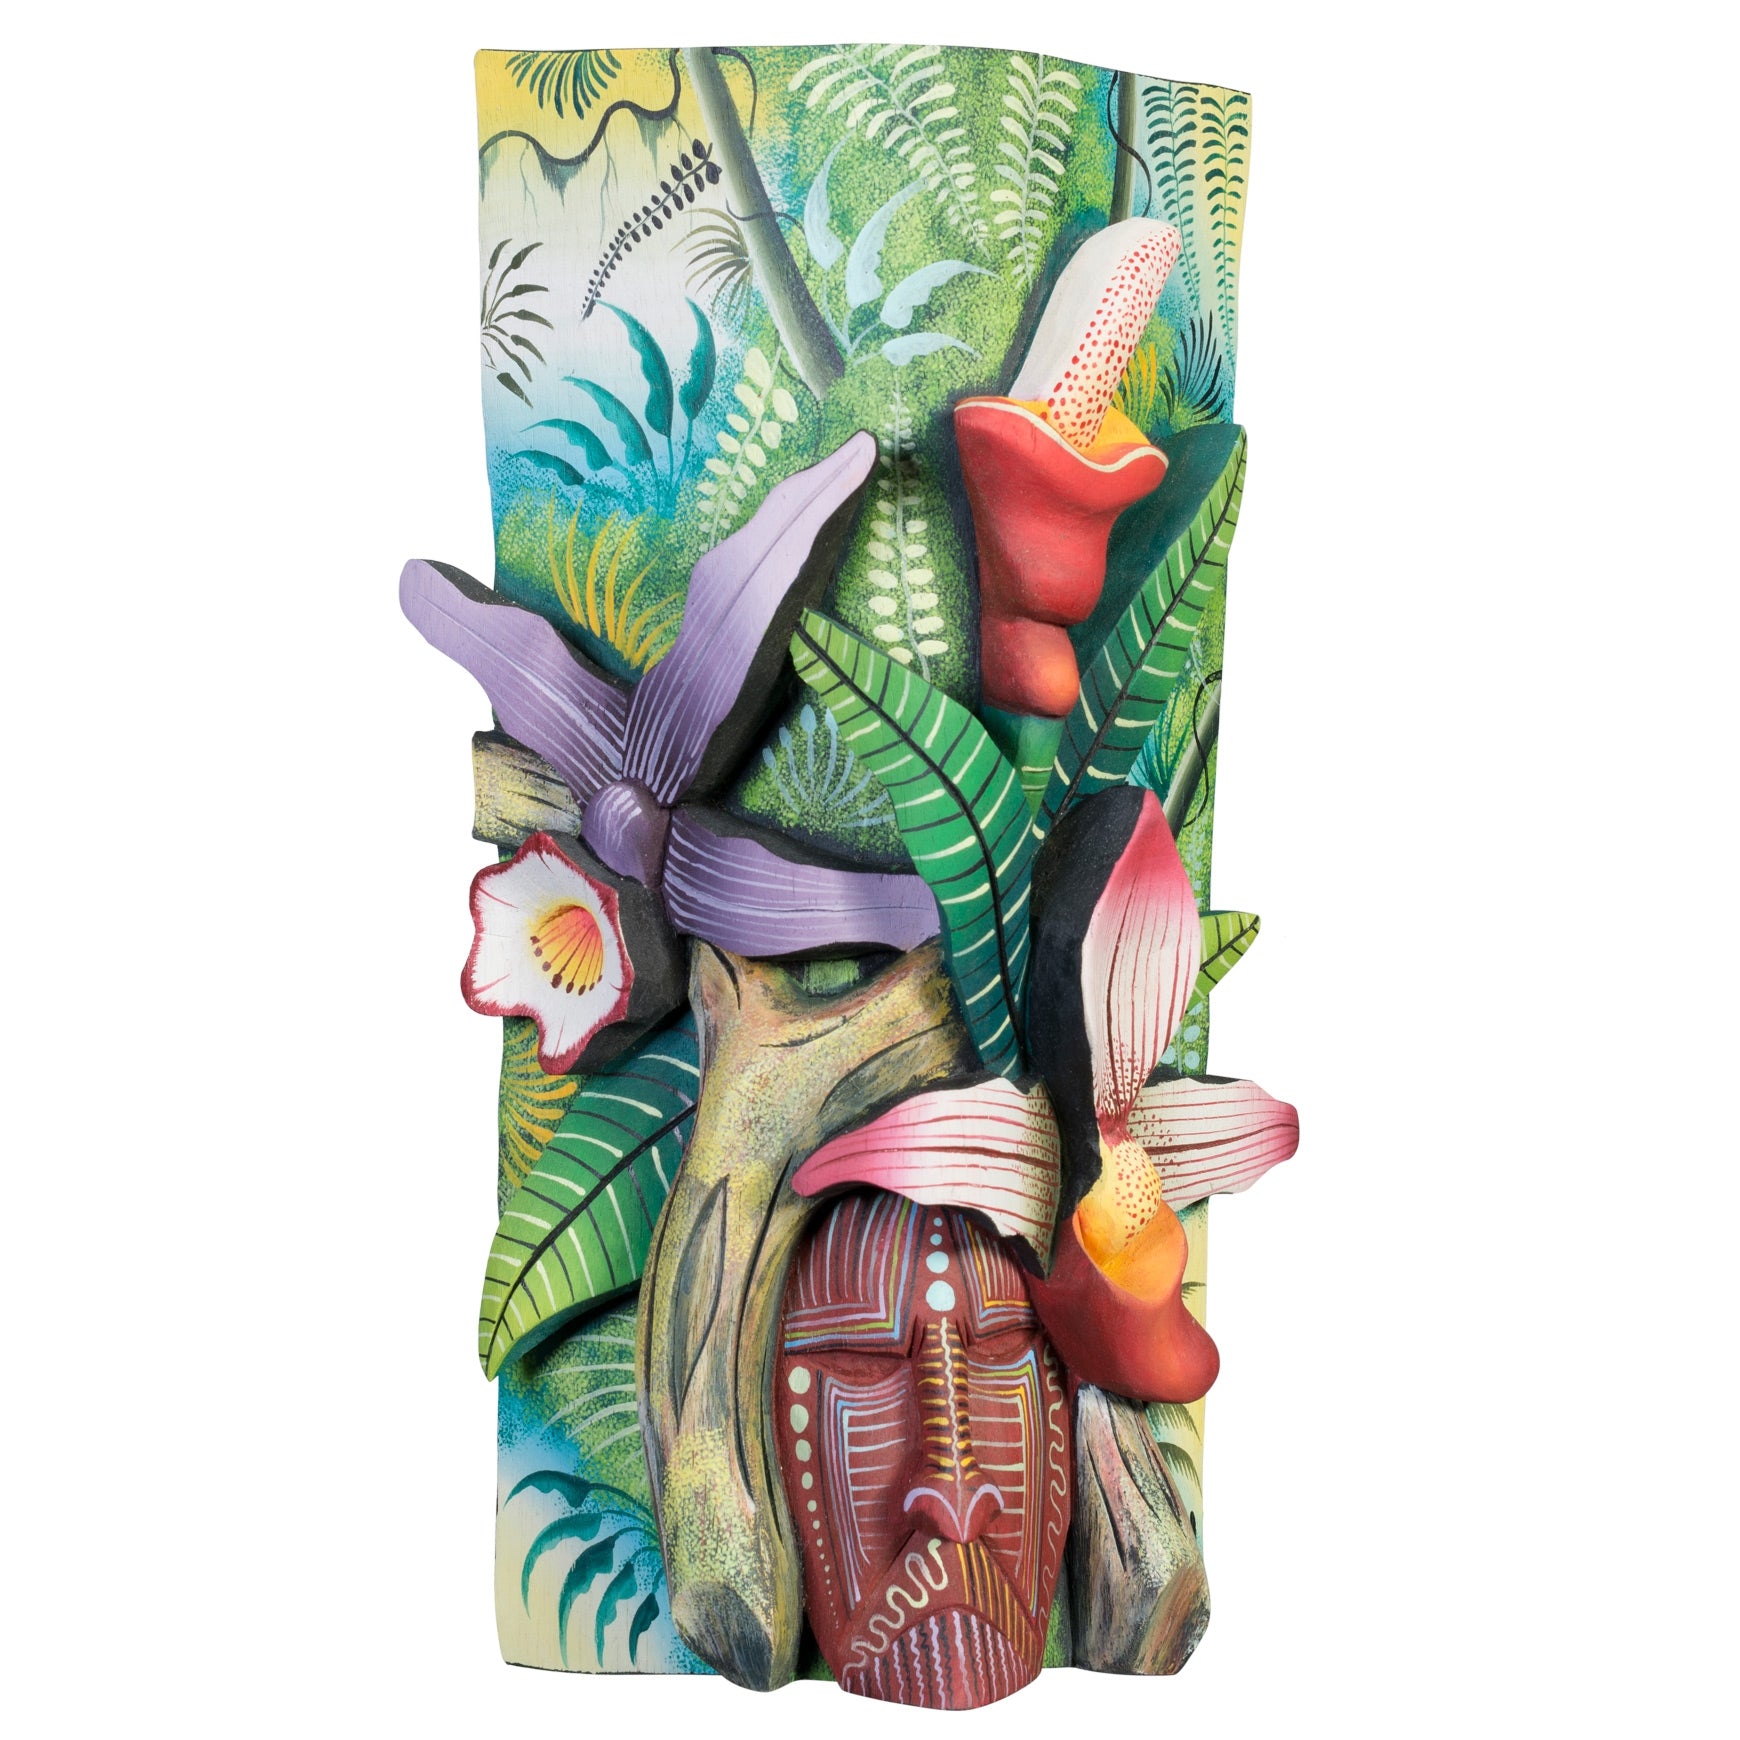 G187 Blooming Ideas by Deiner Maroto and Omer Morales Delgado; Balsa Wood Mask or Totem from Boruca, CR with size 12"